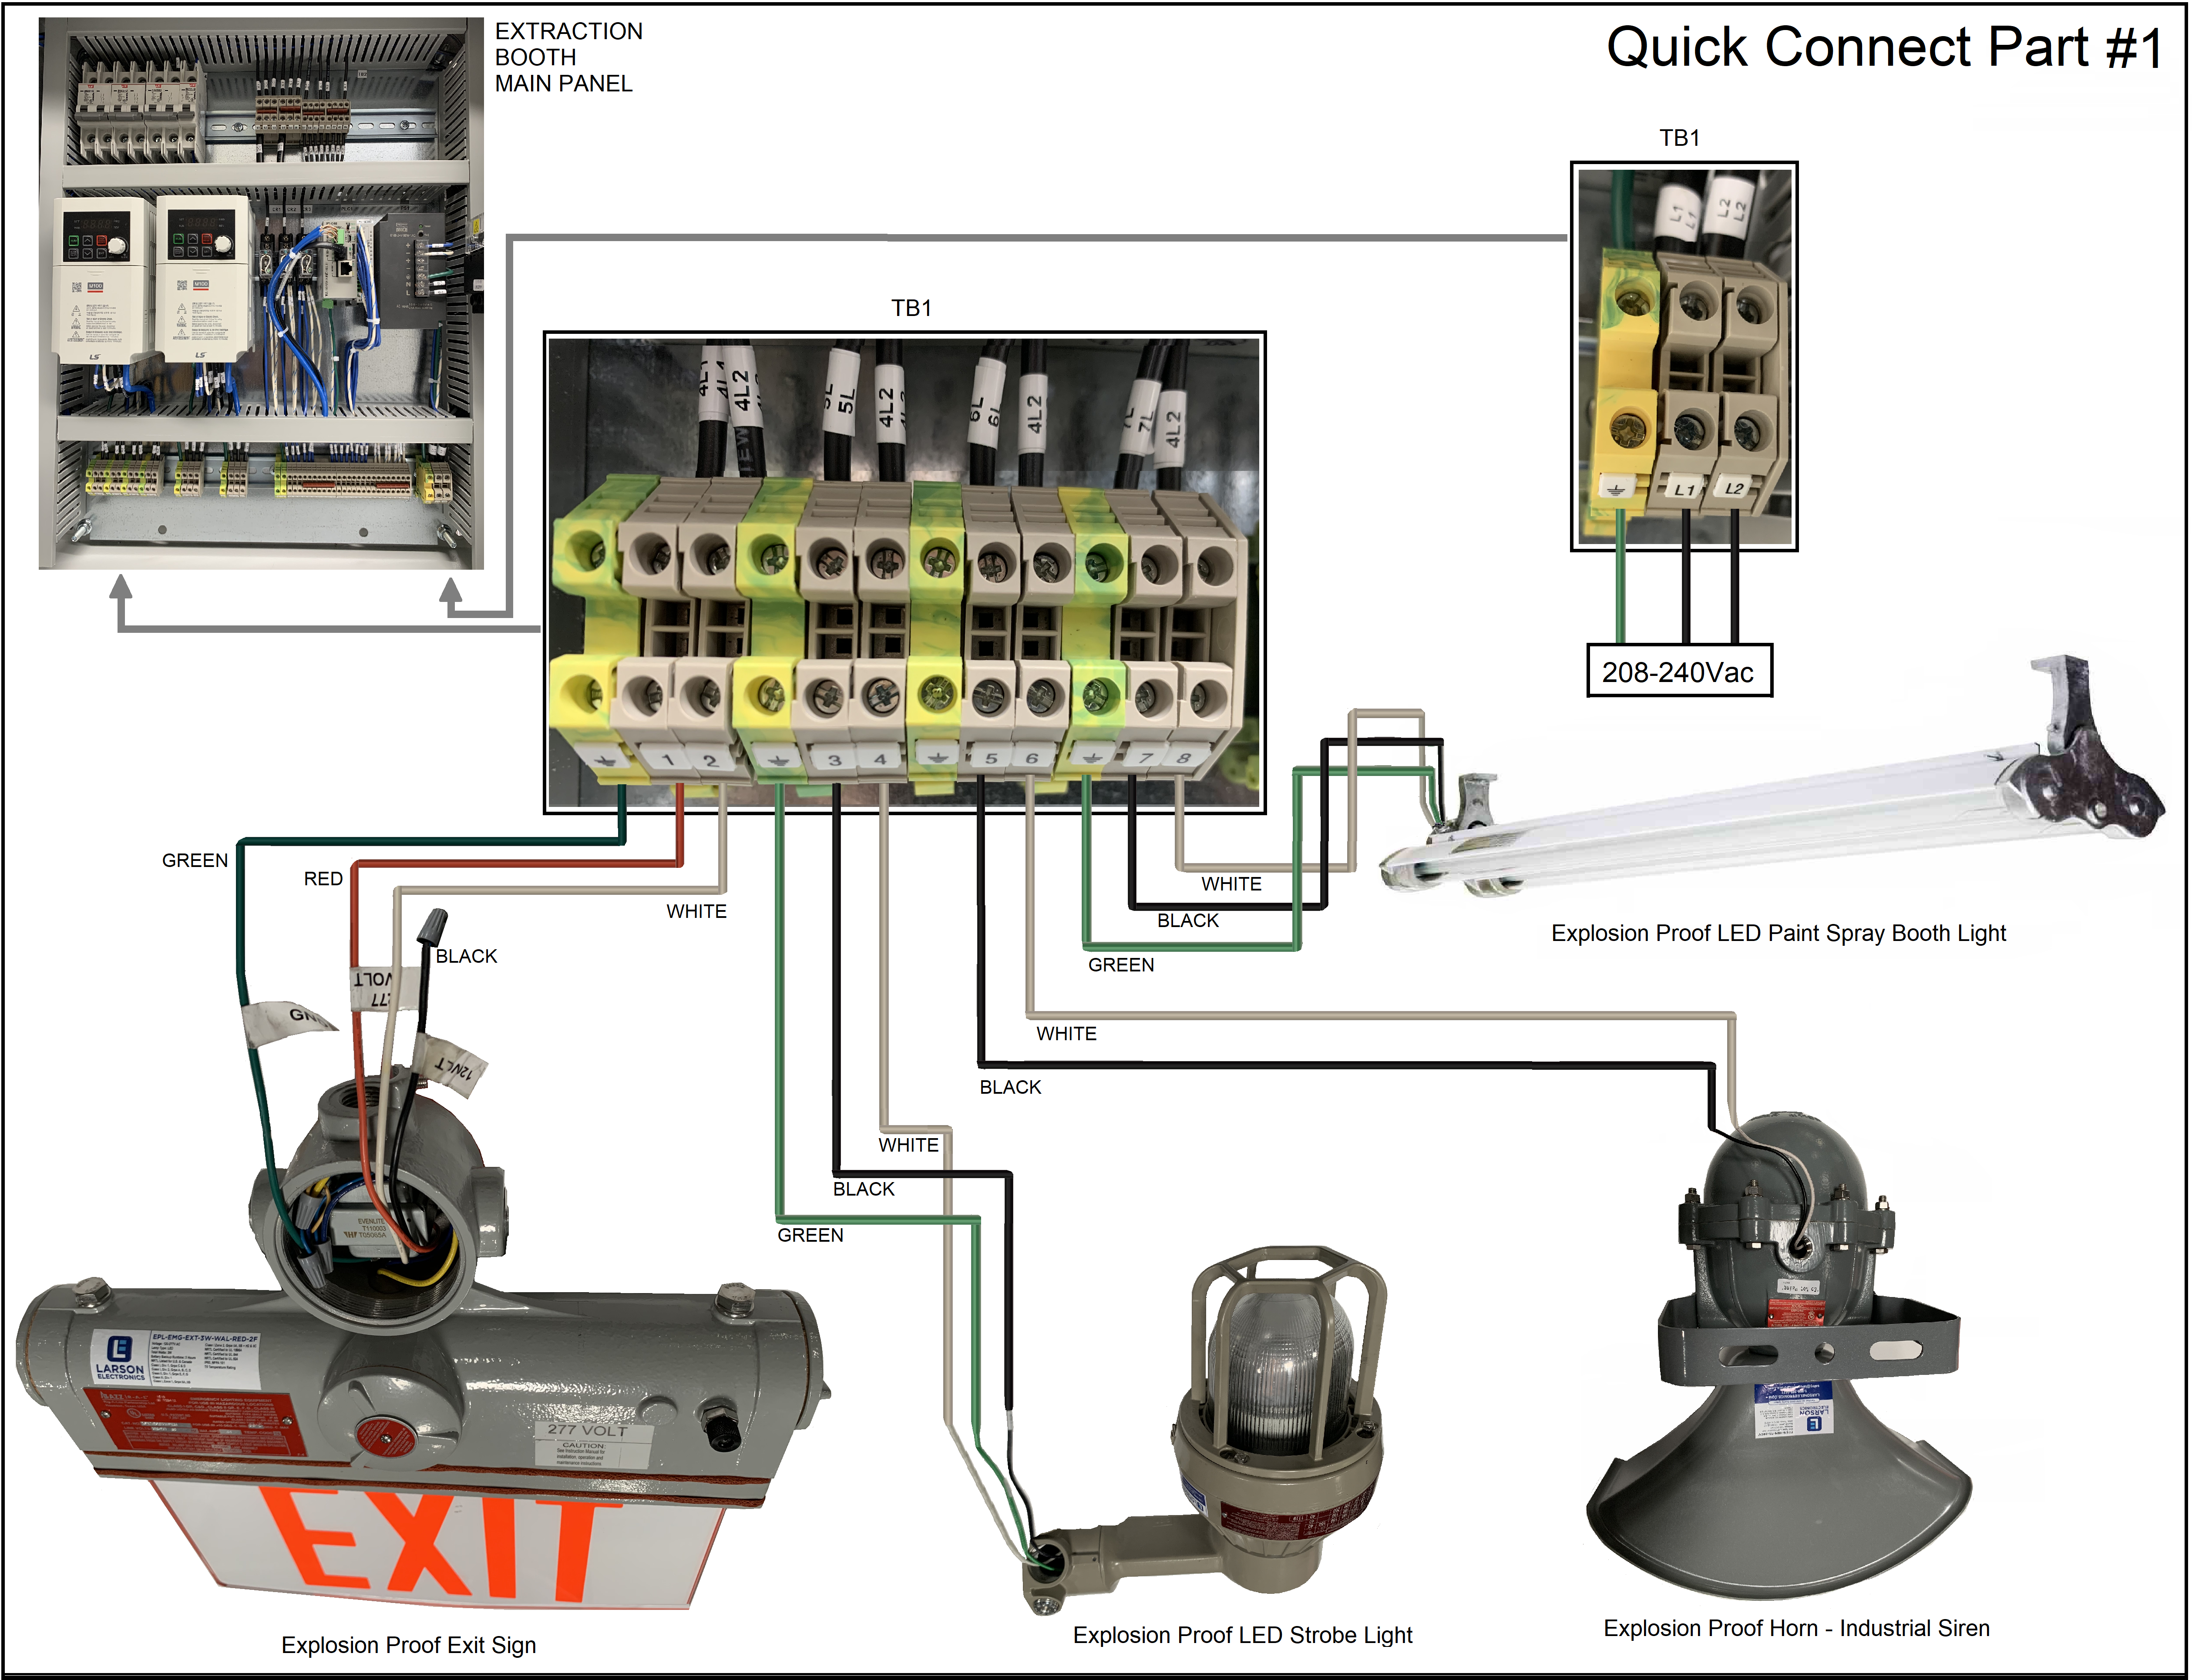 Extraction Booth Controller Drawing ... Free to Download